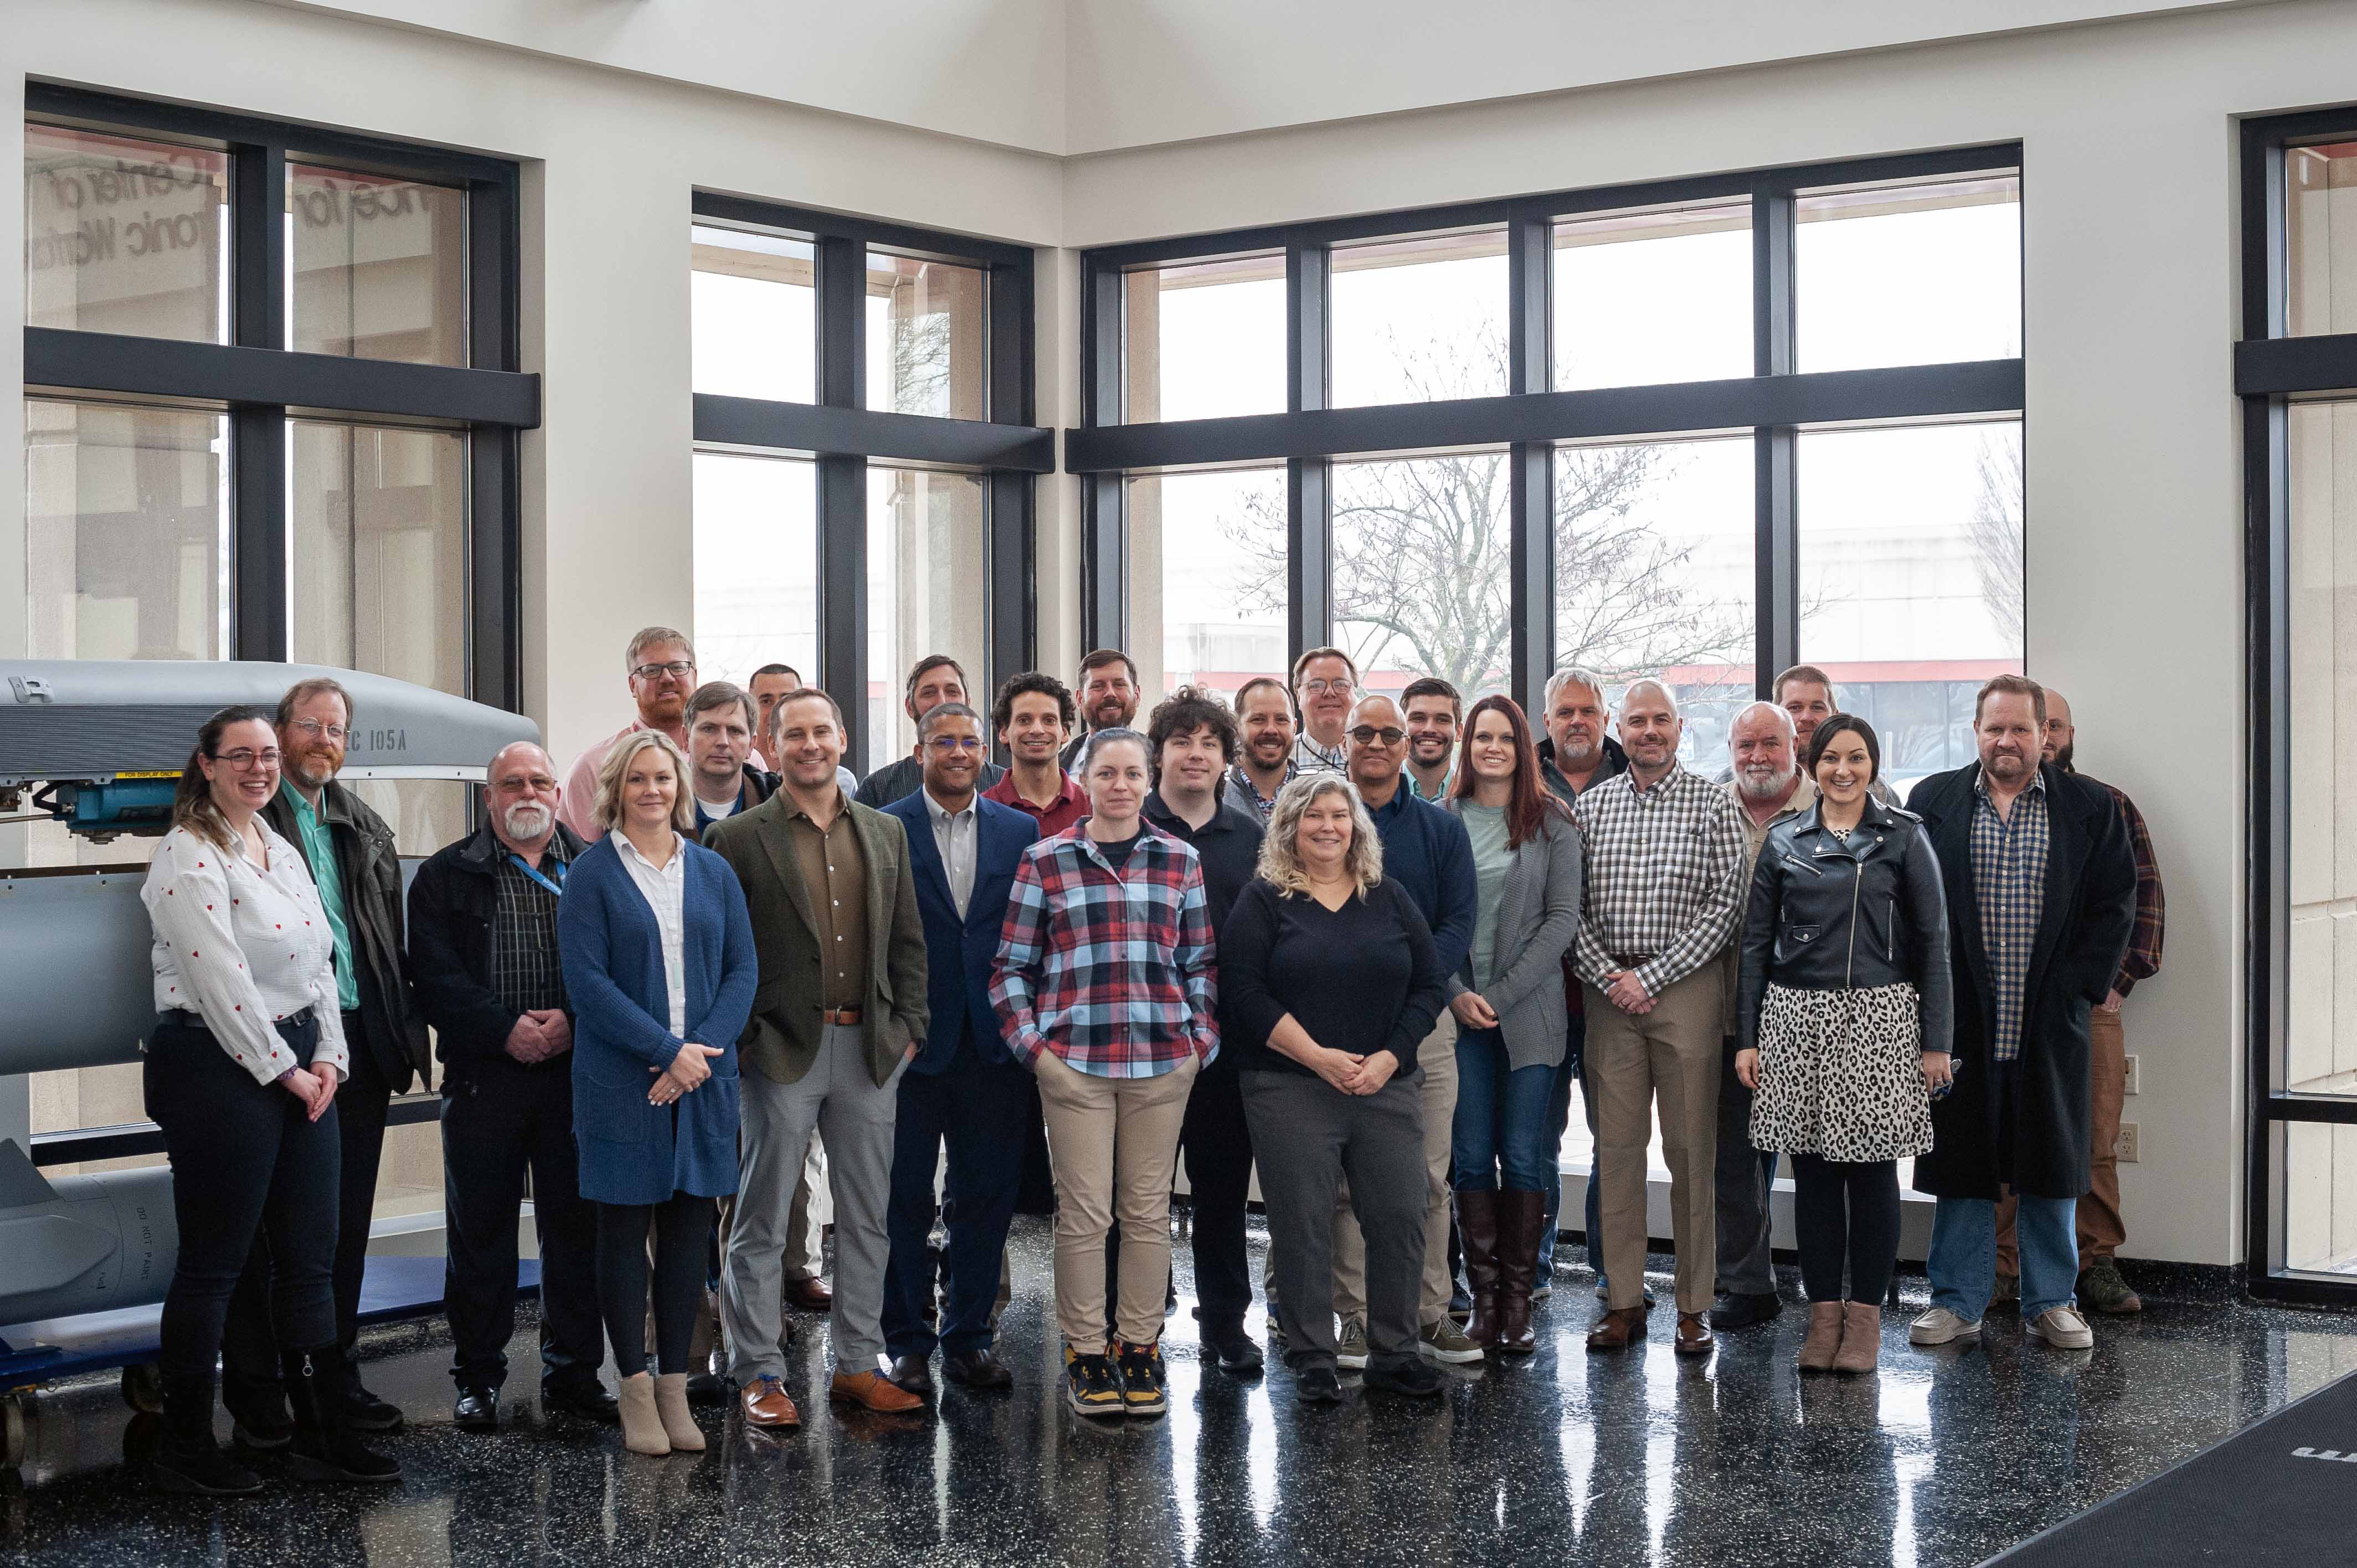 NSWC Crane) held a collaborative event to respond to urgent operational needs on January 23-25. The event, called TRON Queen’s Gambit 24, included in-person and virtual participants from more than a dozen organizations within the Naval Research and Development Establishment (NRDE).